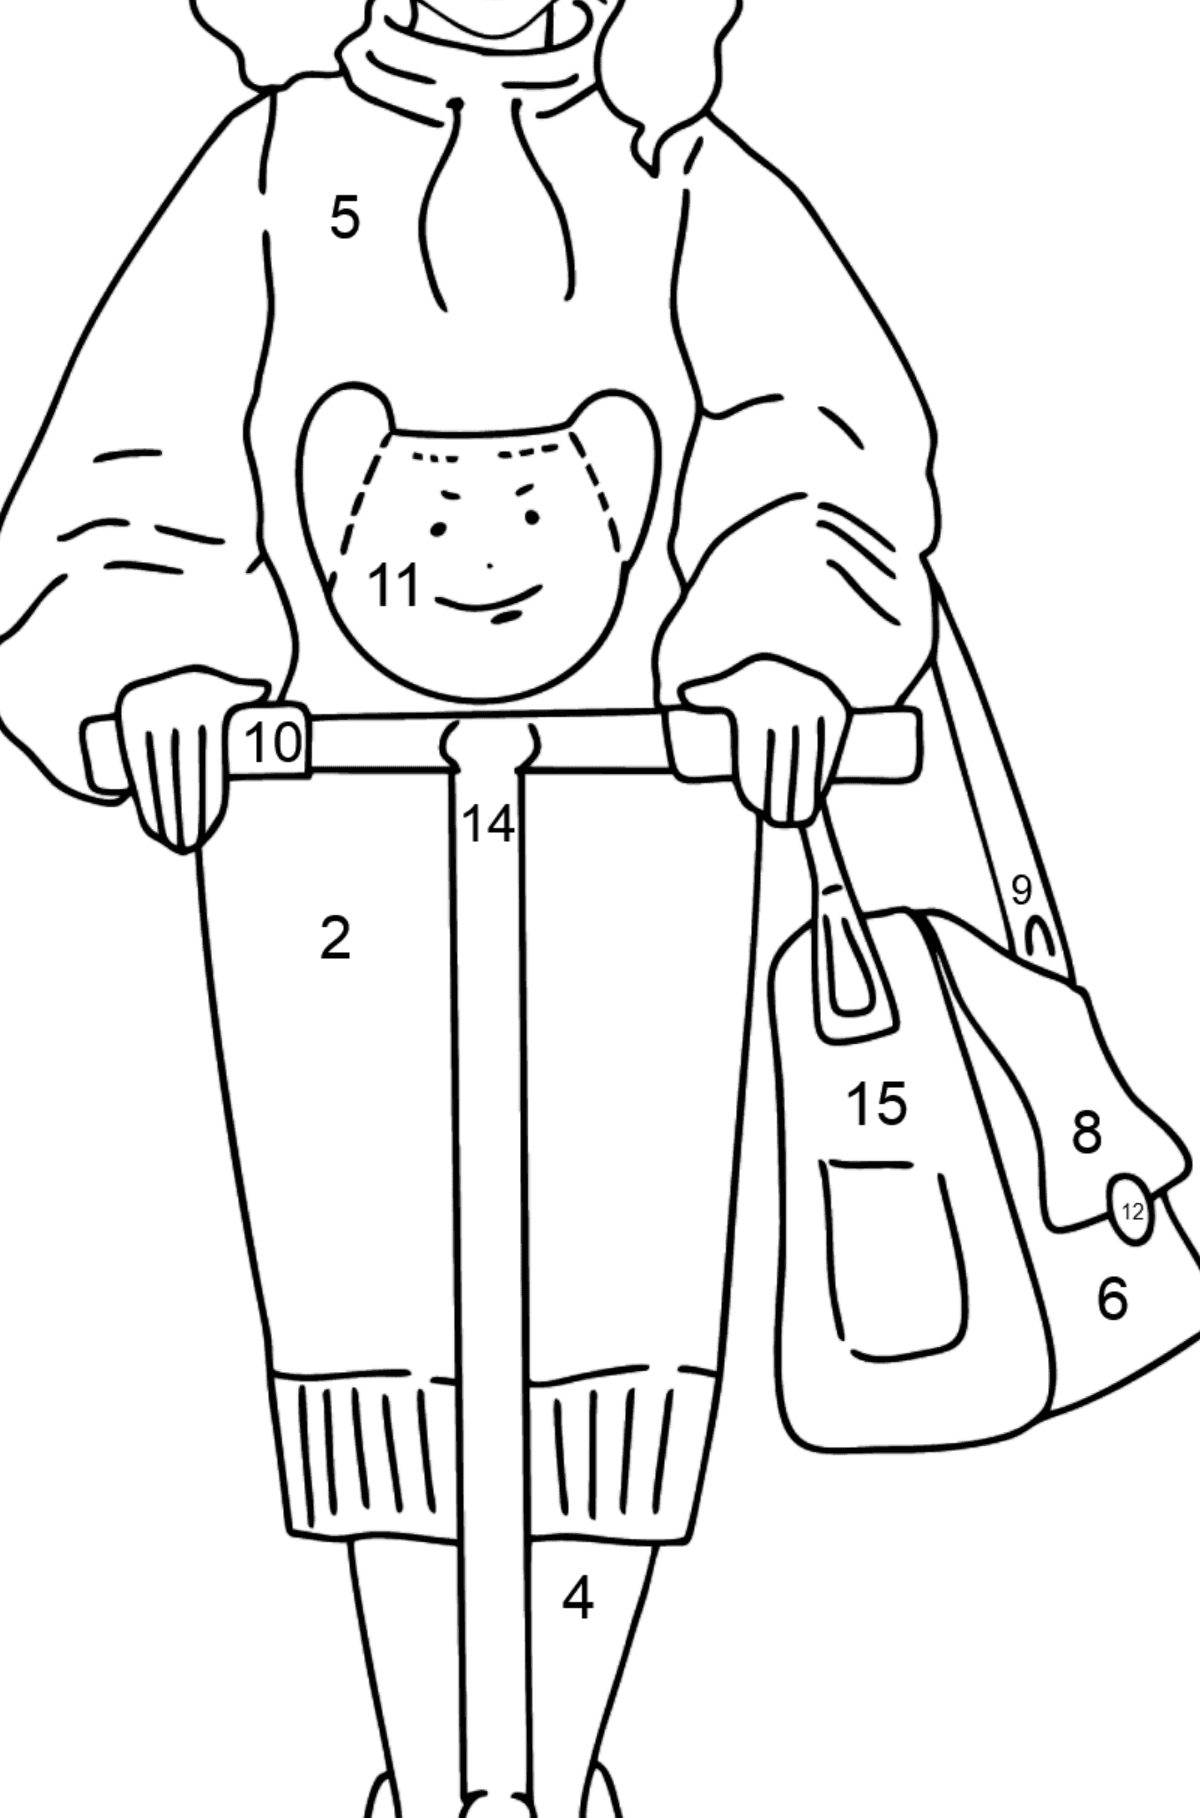 Barbie Doll Riding a Scooter coloring page - Coloring by Numbers for Kids